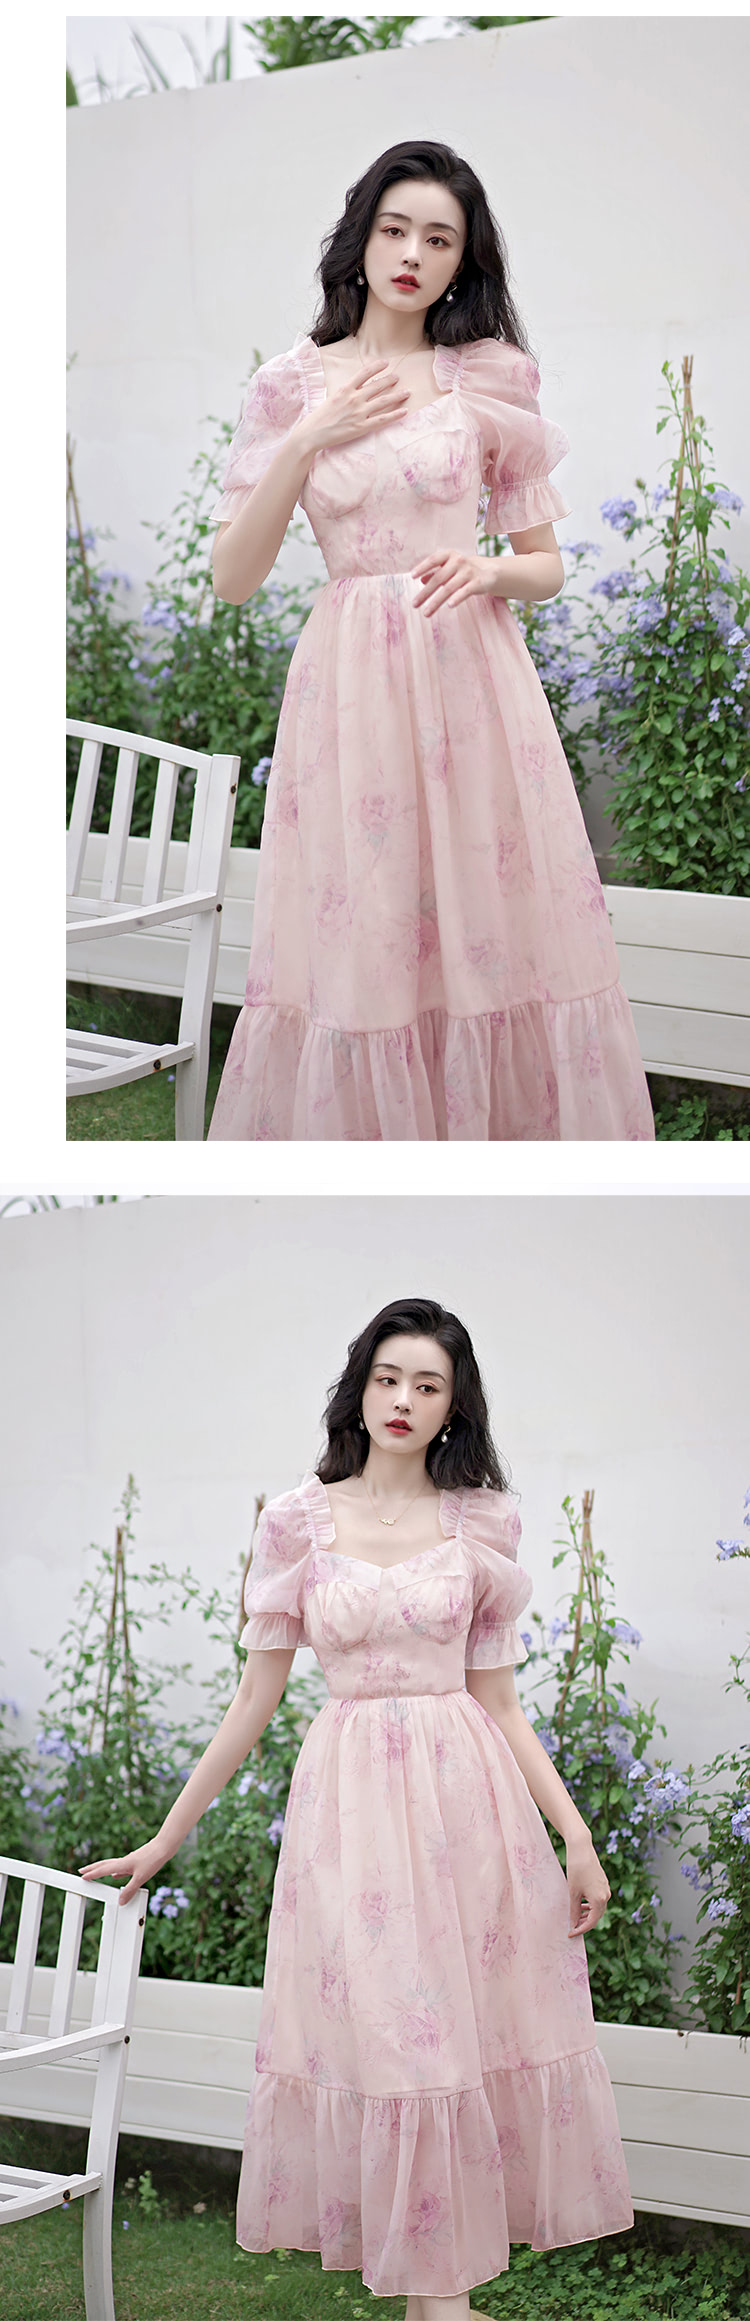 Sweet-French-Style-Pink-Square-Neck-Short-Sleeve-Casual-Dress12